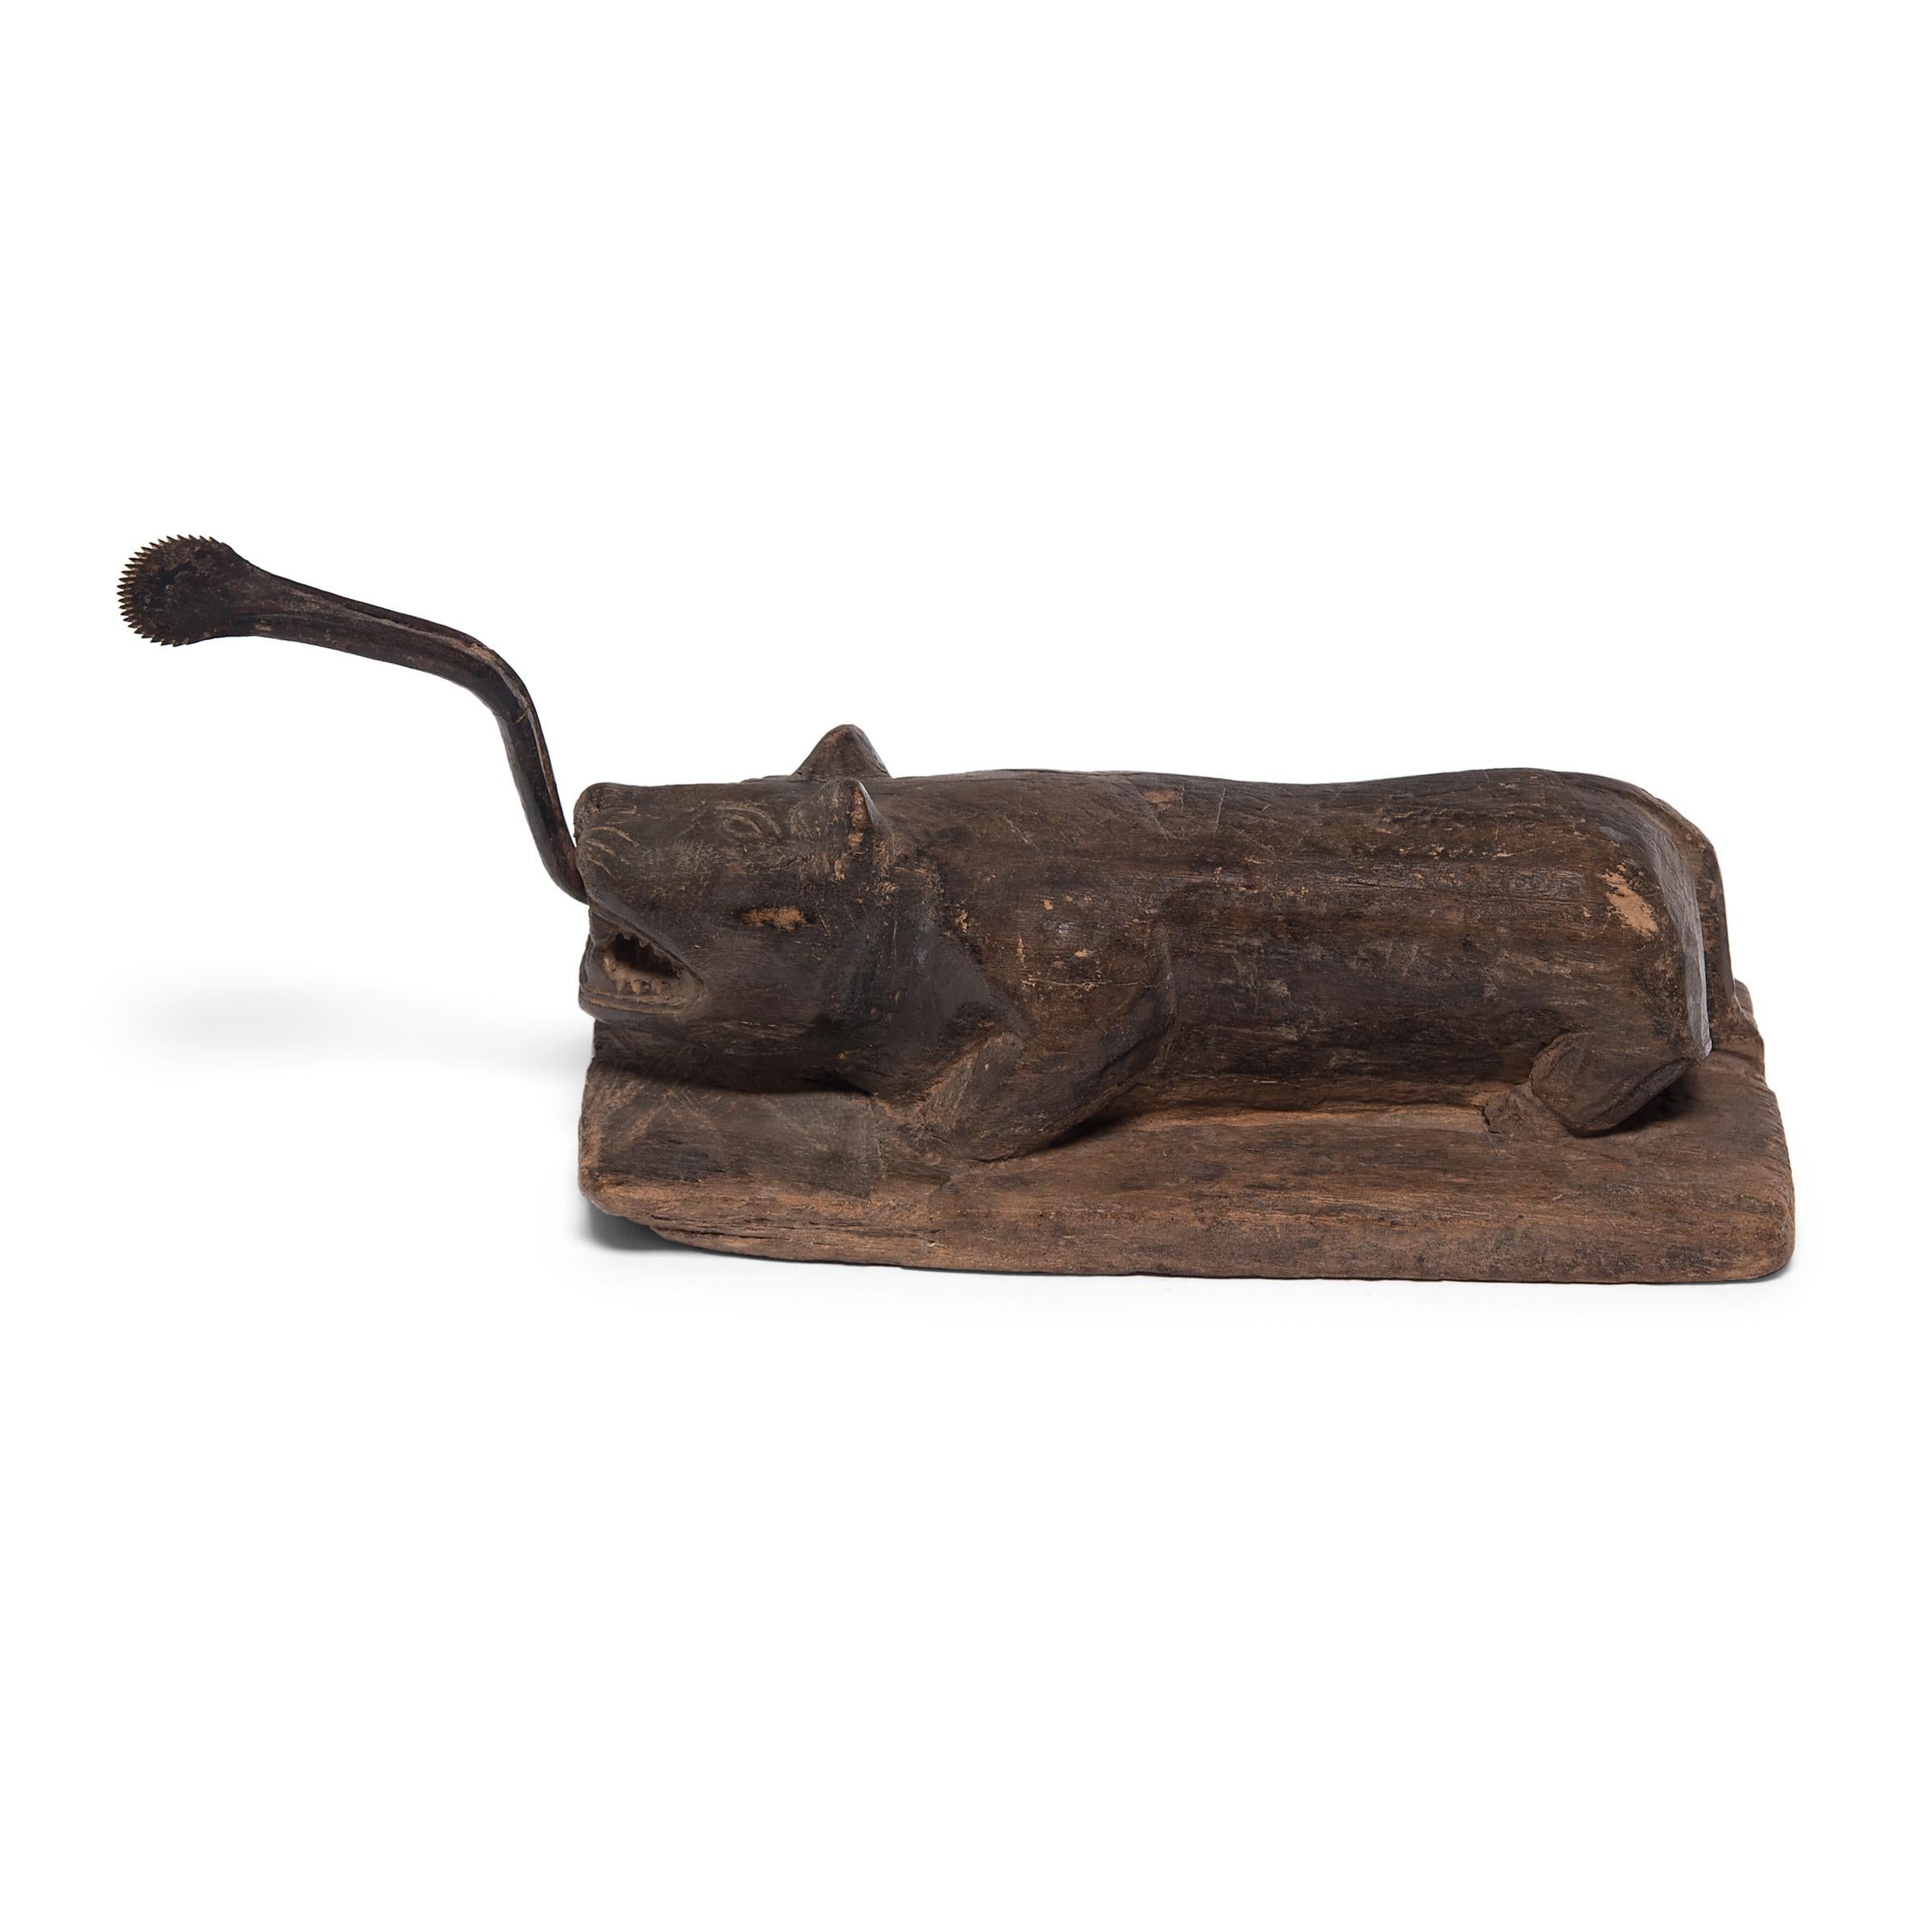 This sculptural early 20th century coconut splitter was carved into the form of a crouching beast ready to pounce. It was likely a merchant's tool in a Southeast Asian market used to split coconuts which were then ground into fine snow-like flakes